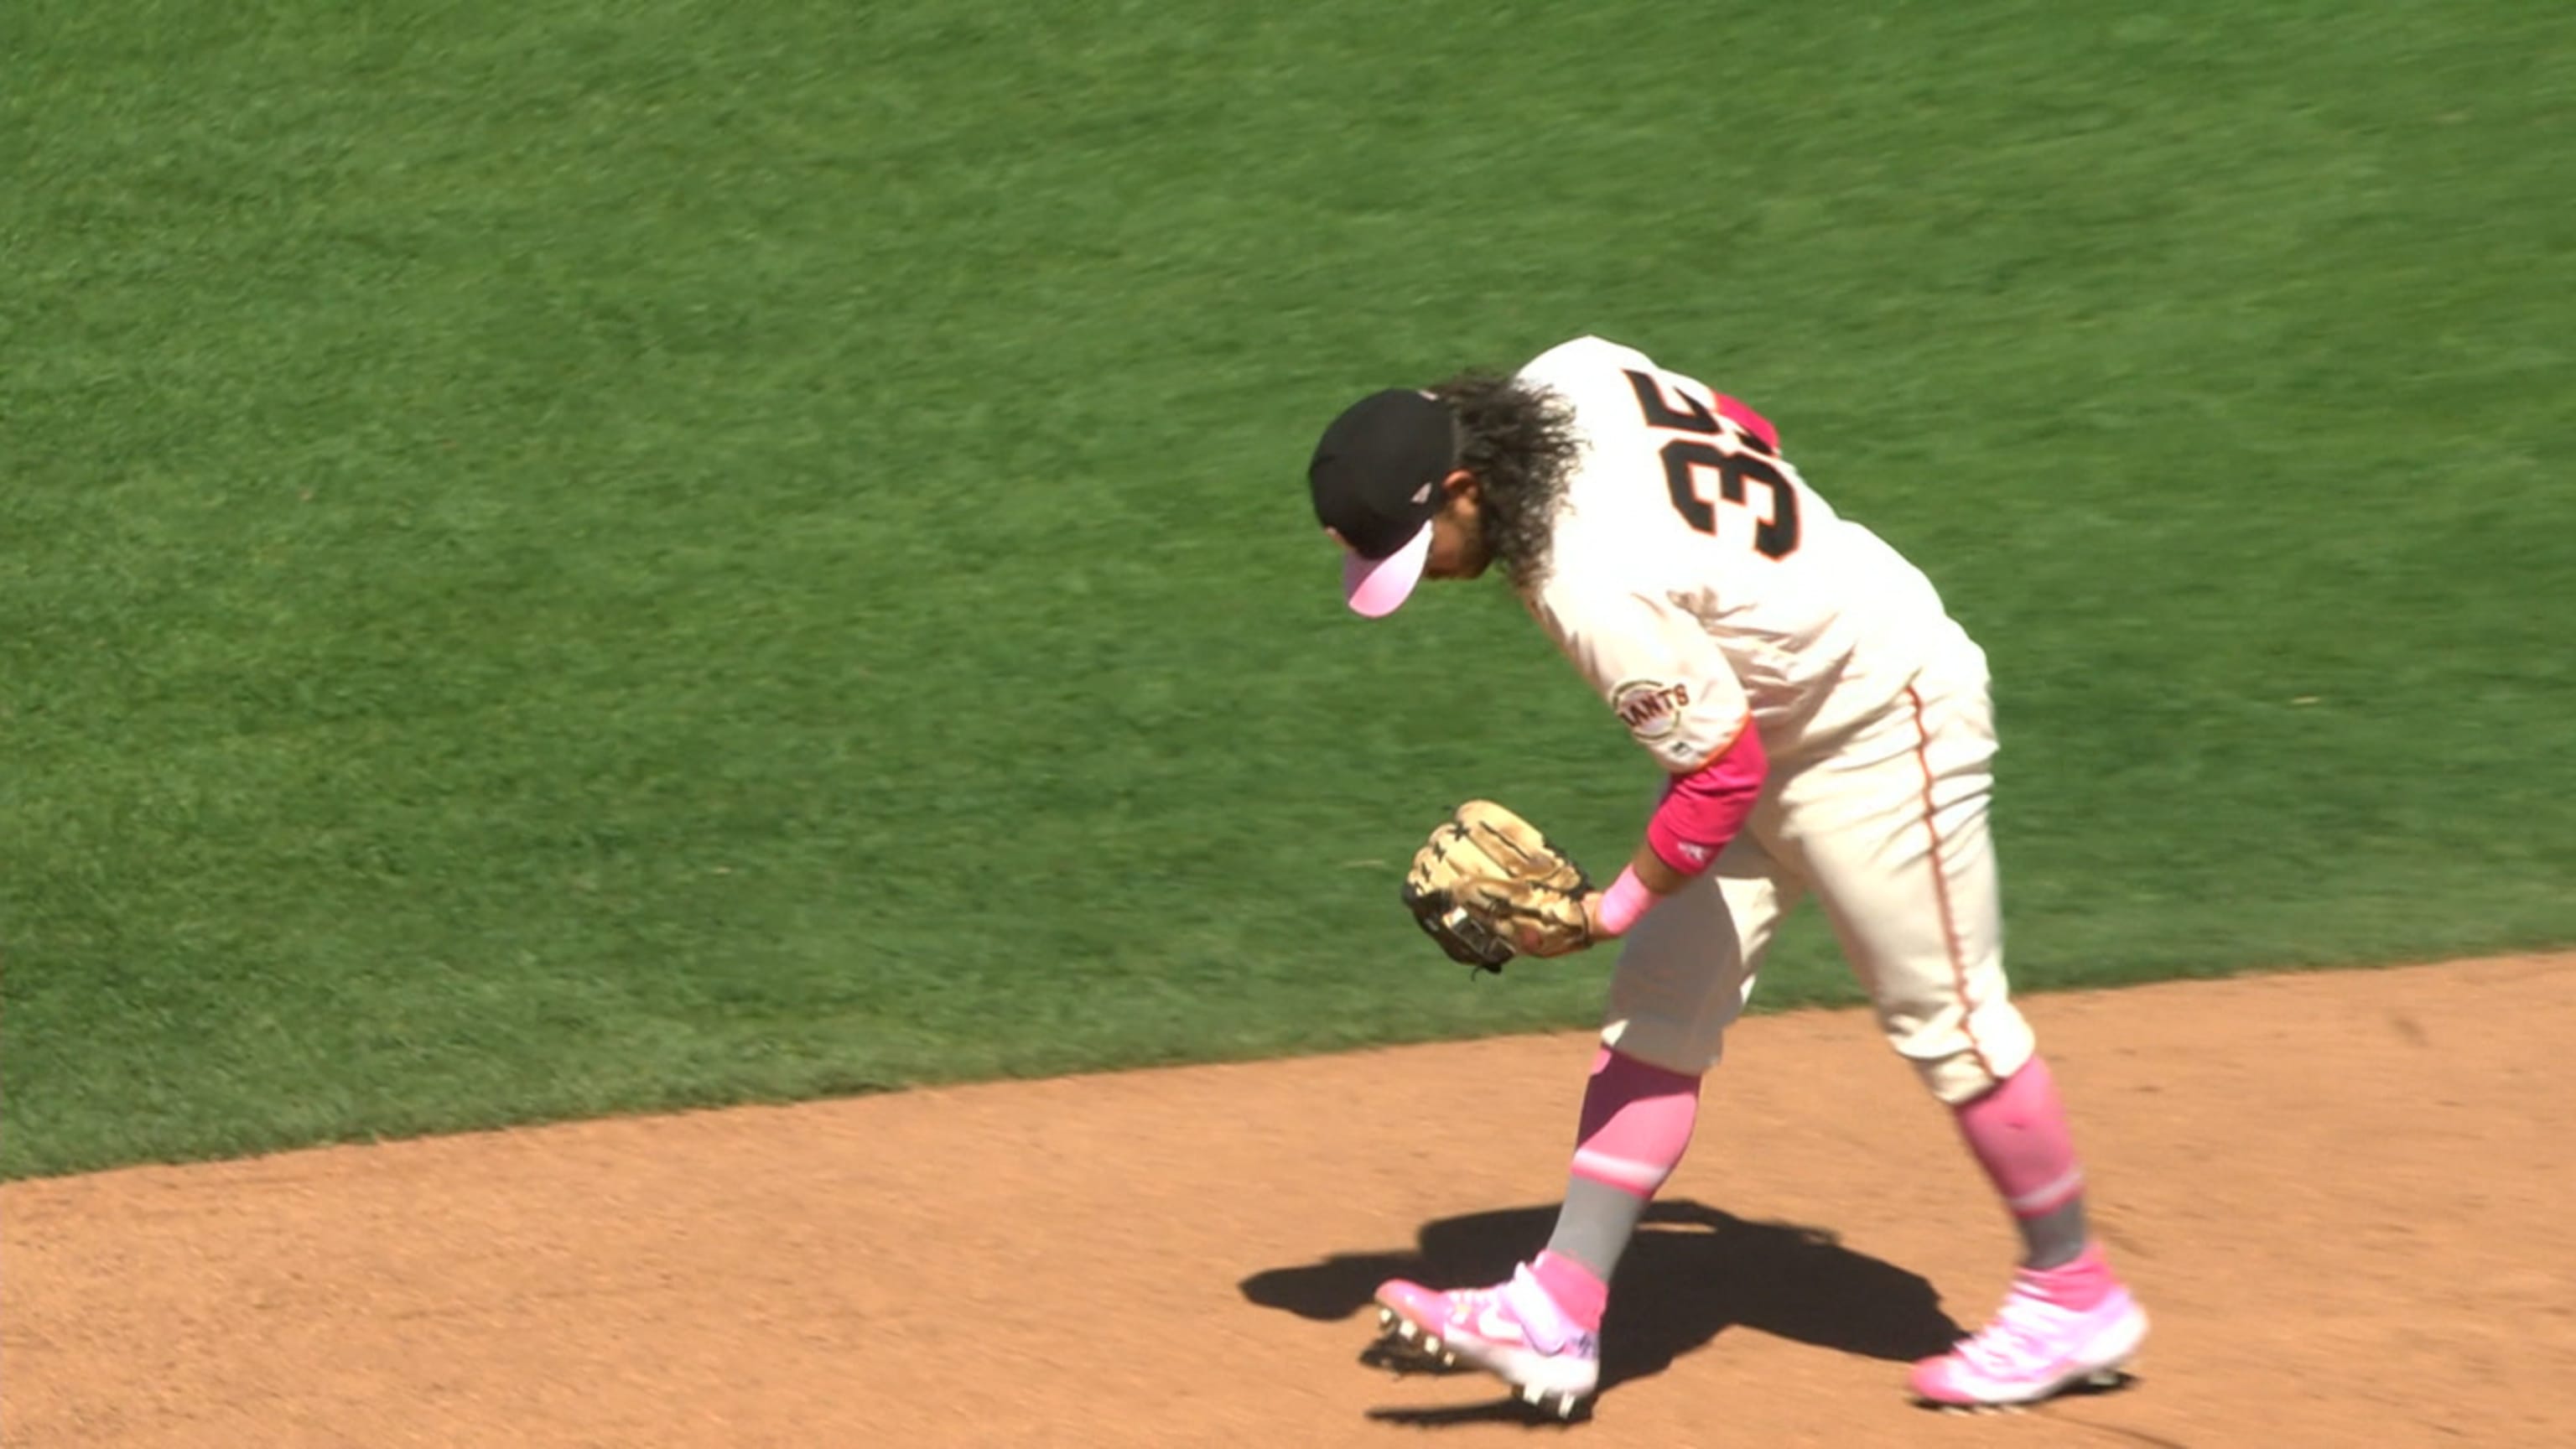 Crawford wears stick figure Mother's Day cleats